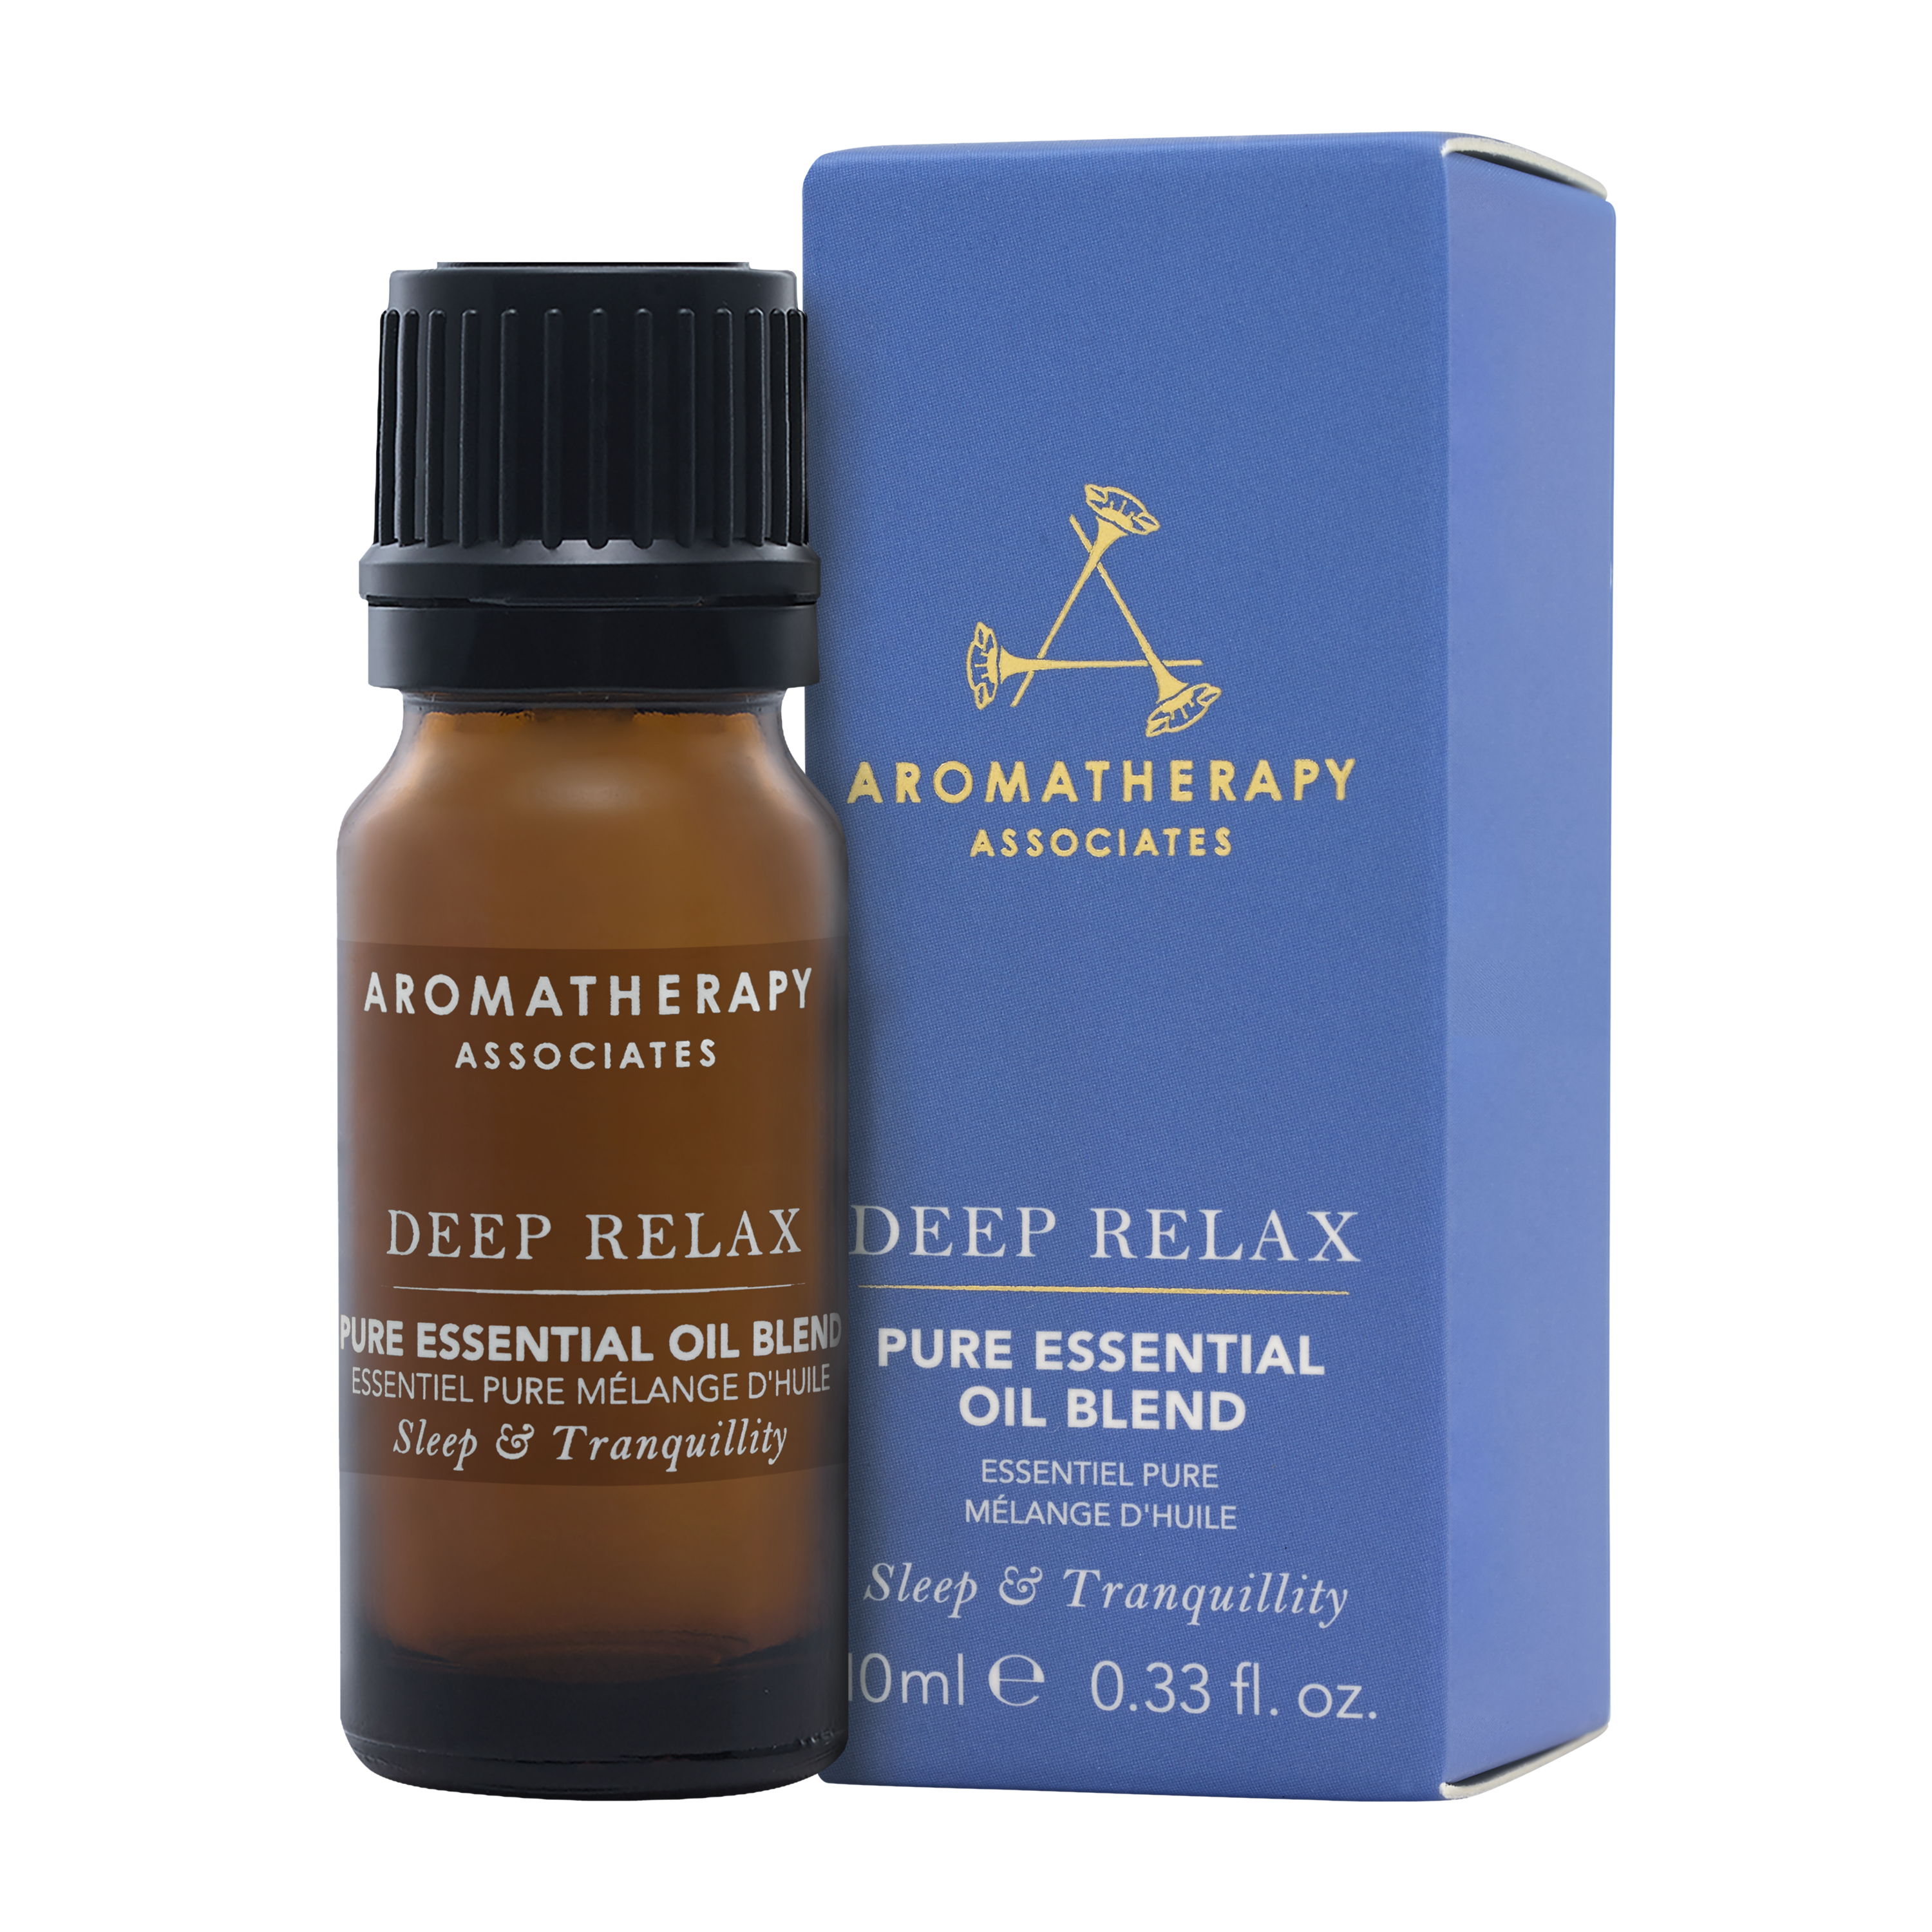 Deep Relax Pure Essential Oil Blend Aromatherapy Associates